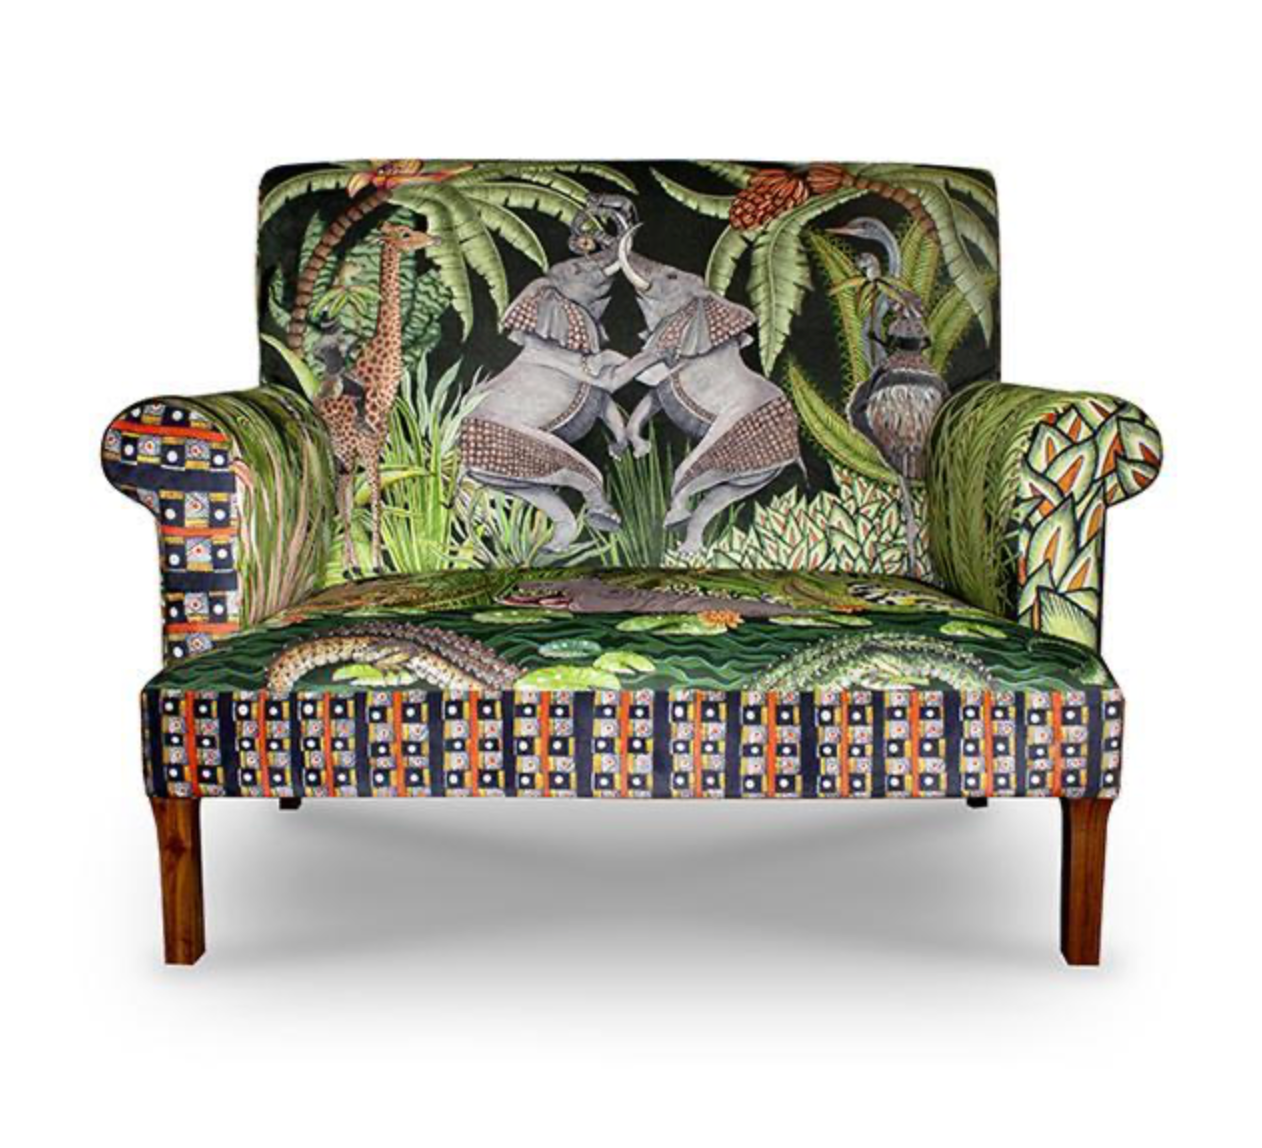 Sabie Delta Limited Edition Sofa by Ardmore handmade in South Africa**